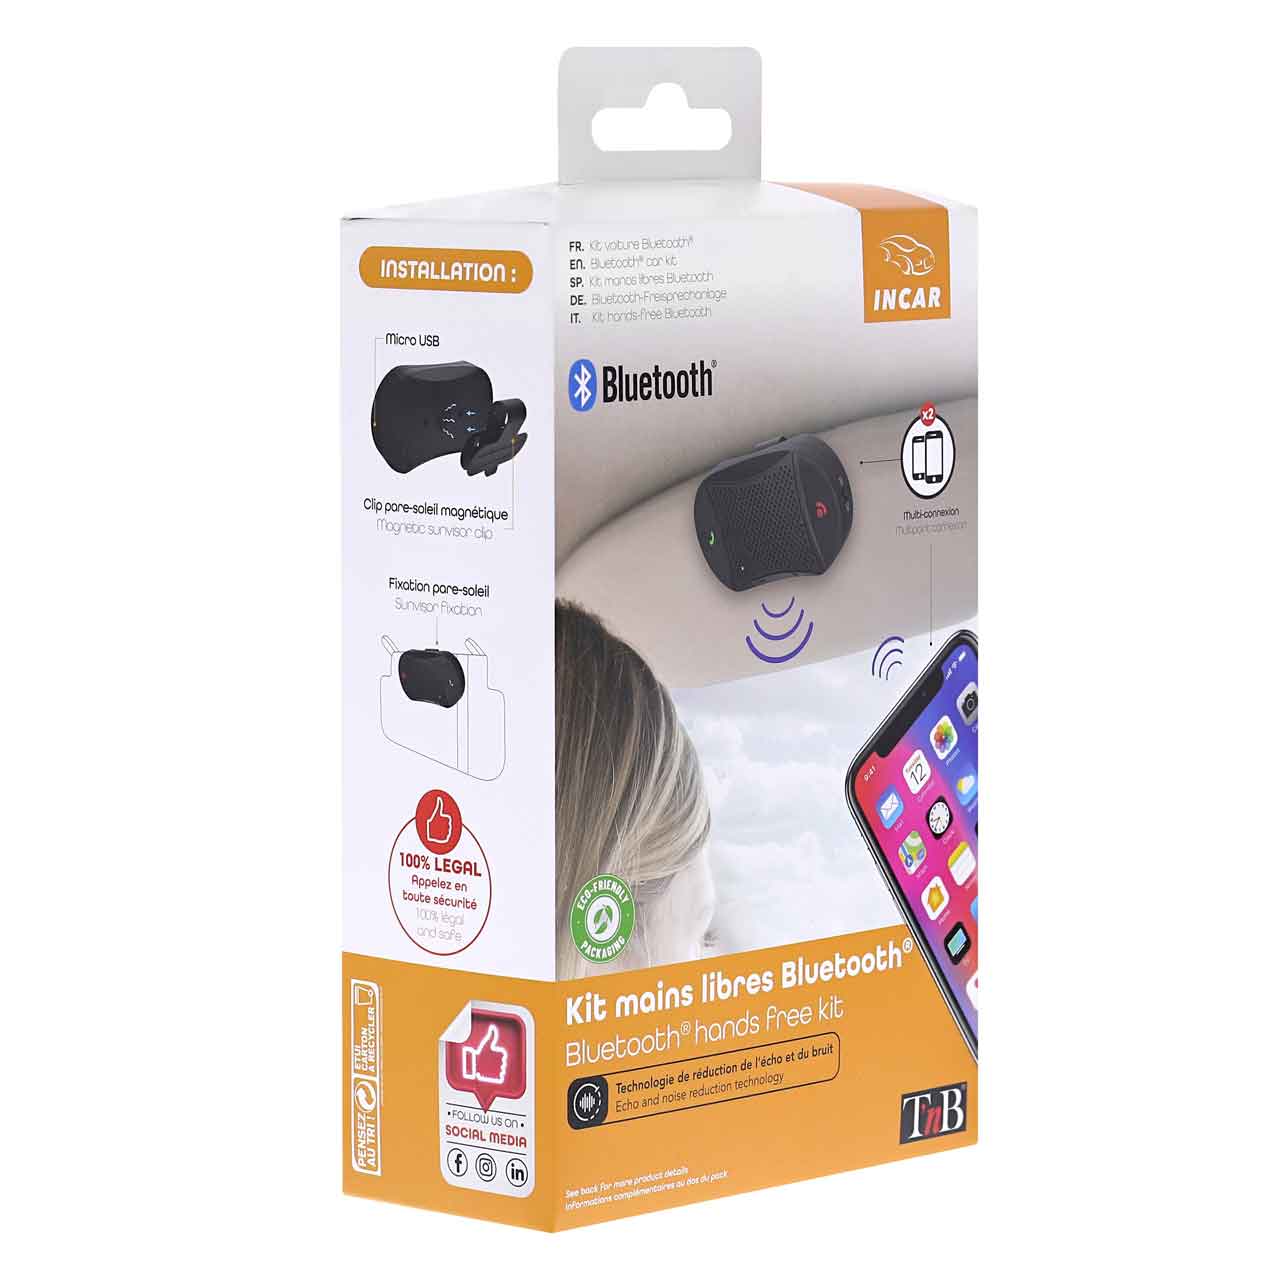 TNB CARBTKIT4V2 BLUETOOTH HANDS FREE KIT WITH BUILT IN MICROPHONE